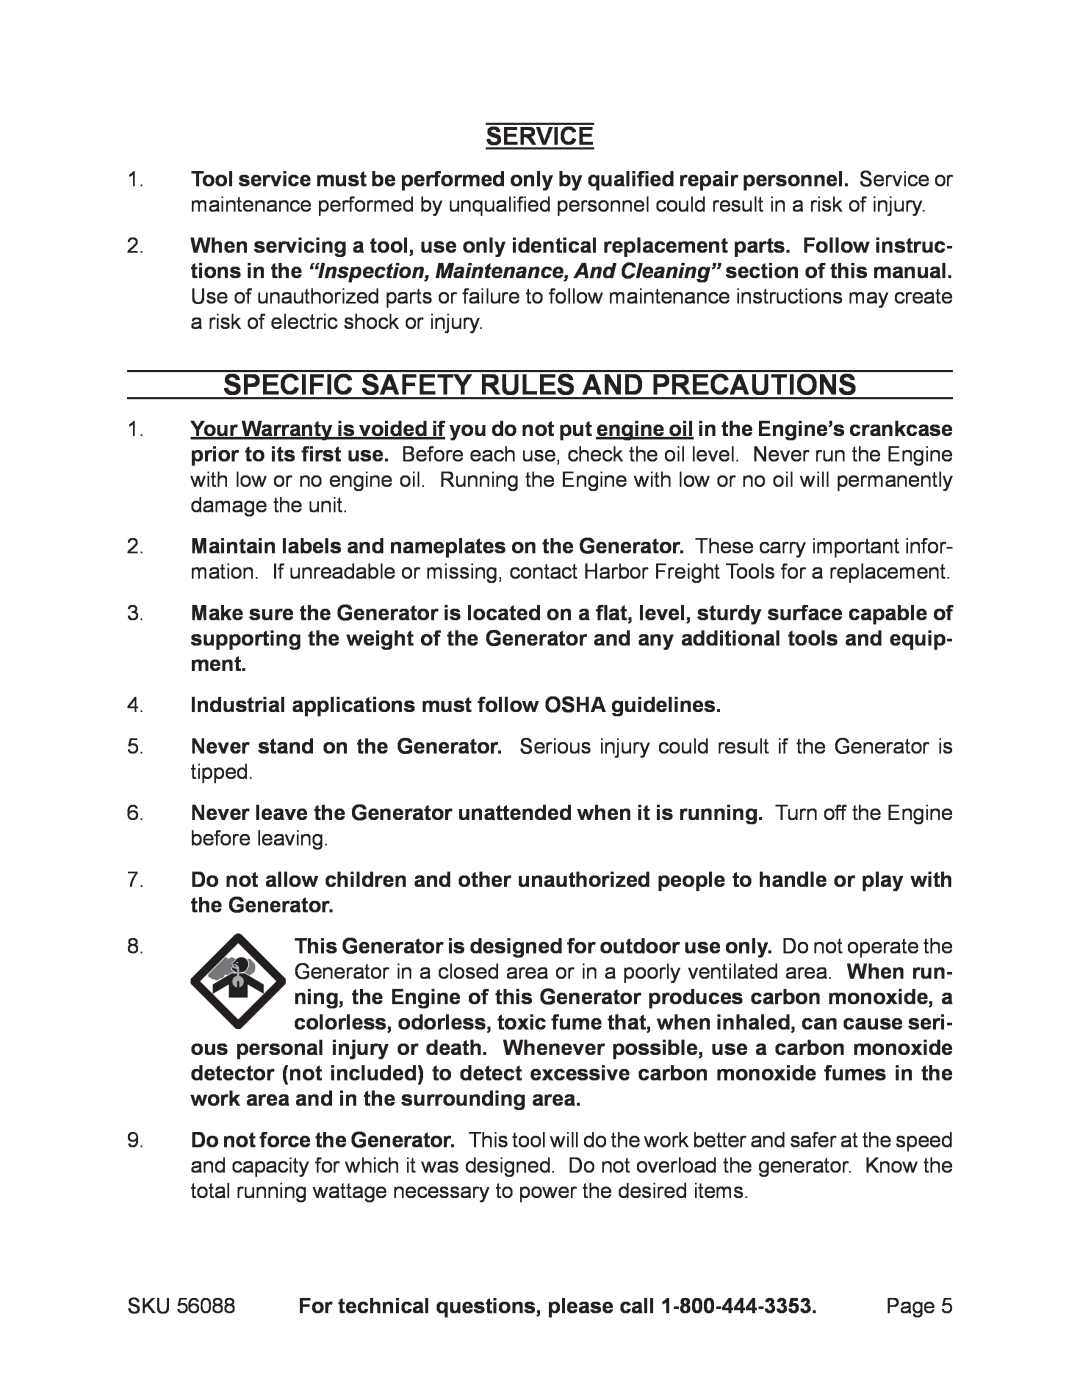 Harbor Freight Tools 56088 warranty Specific Safety Rules And Precautions, Service, For technical questions, please call 